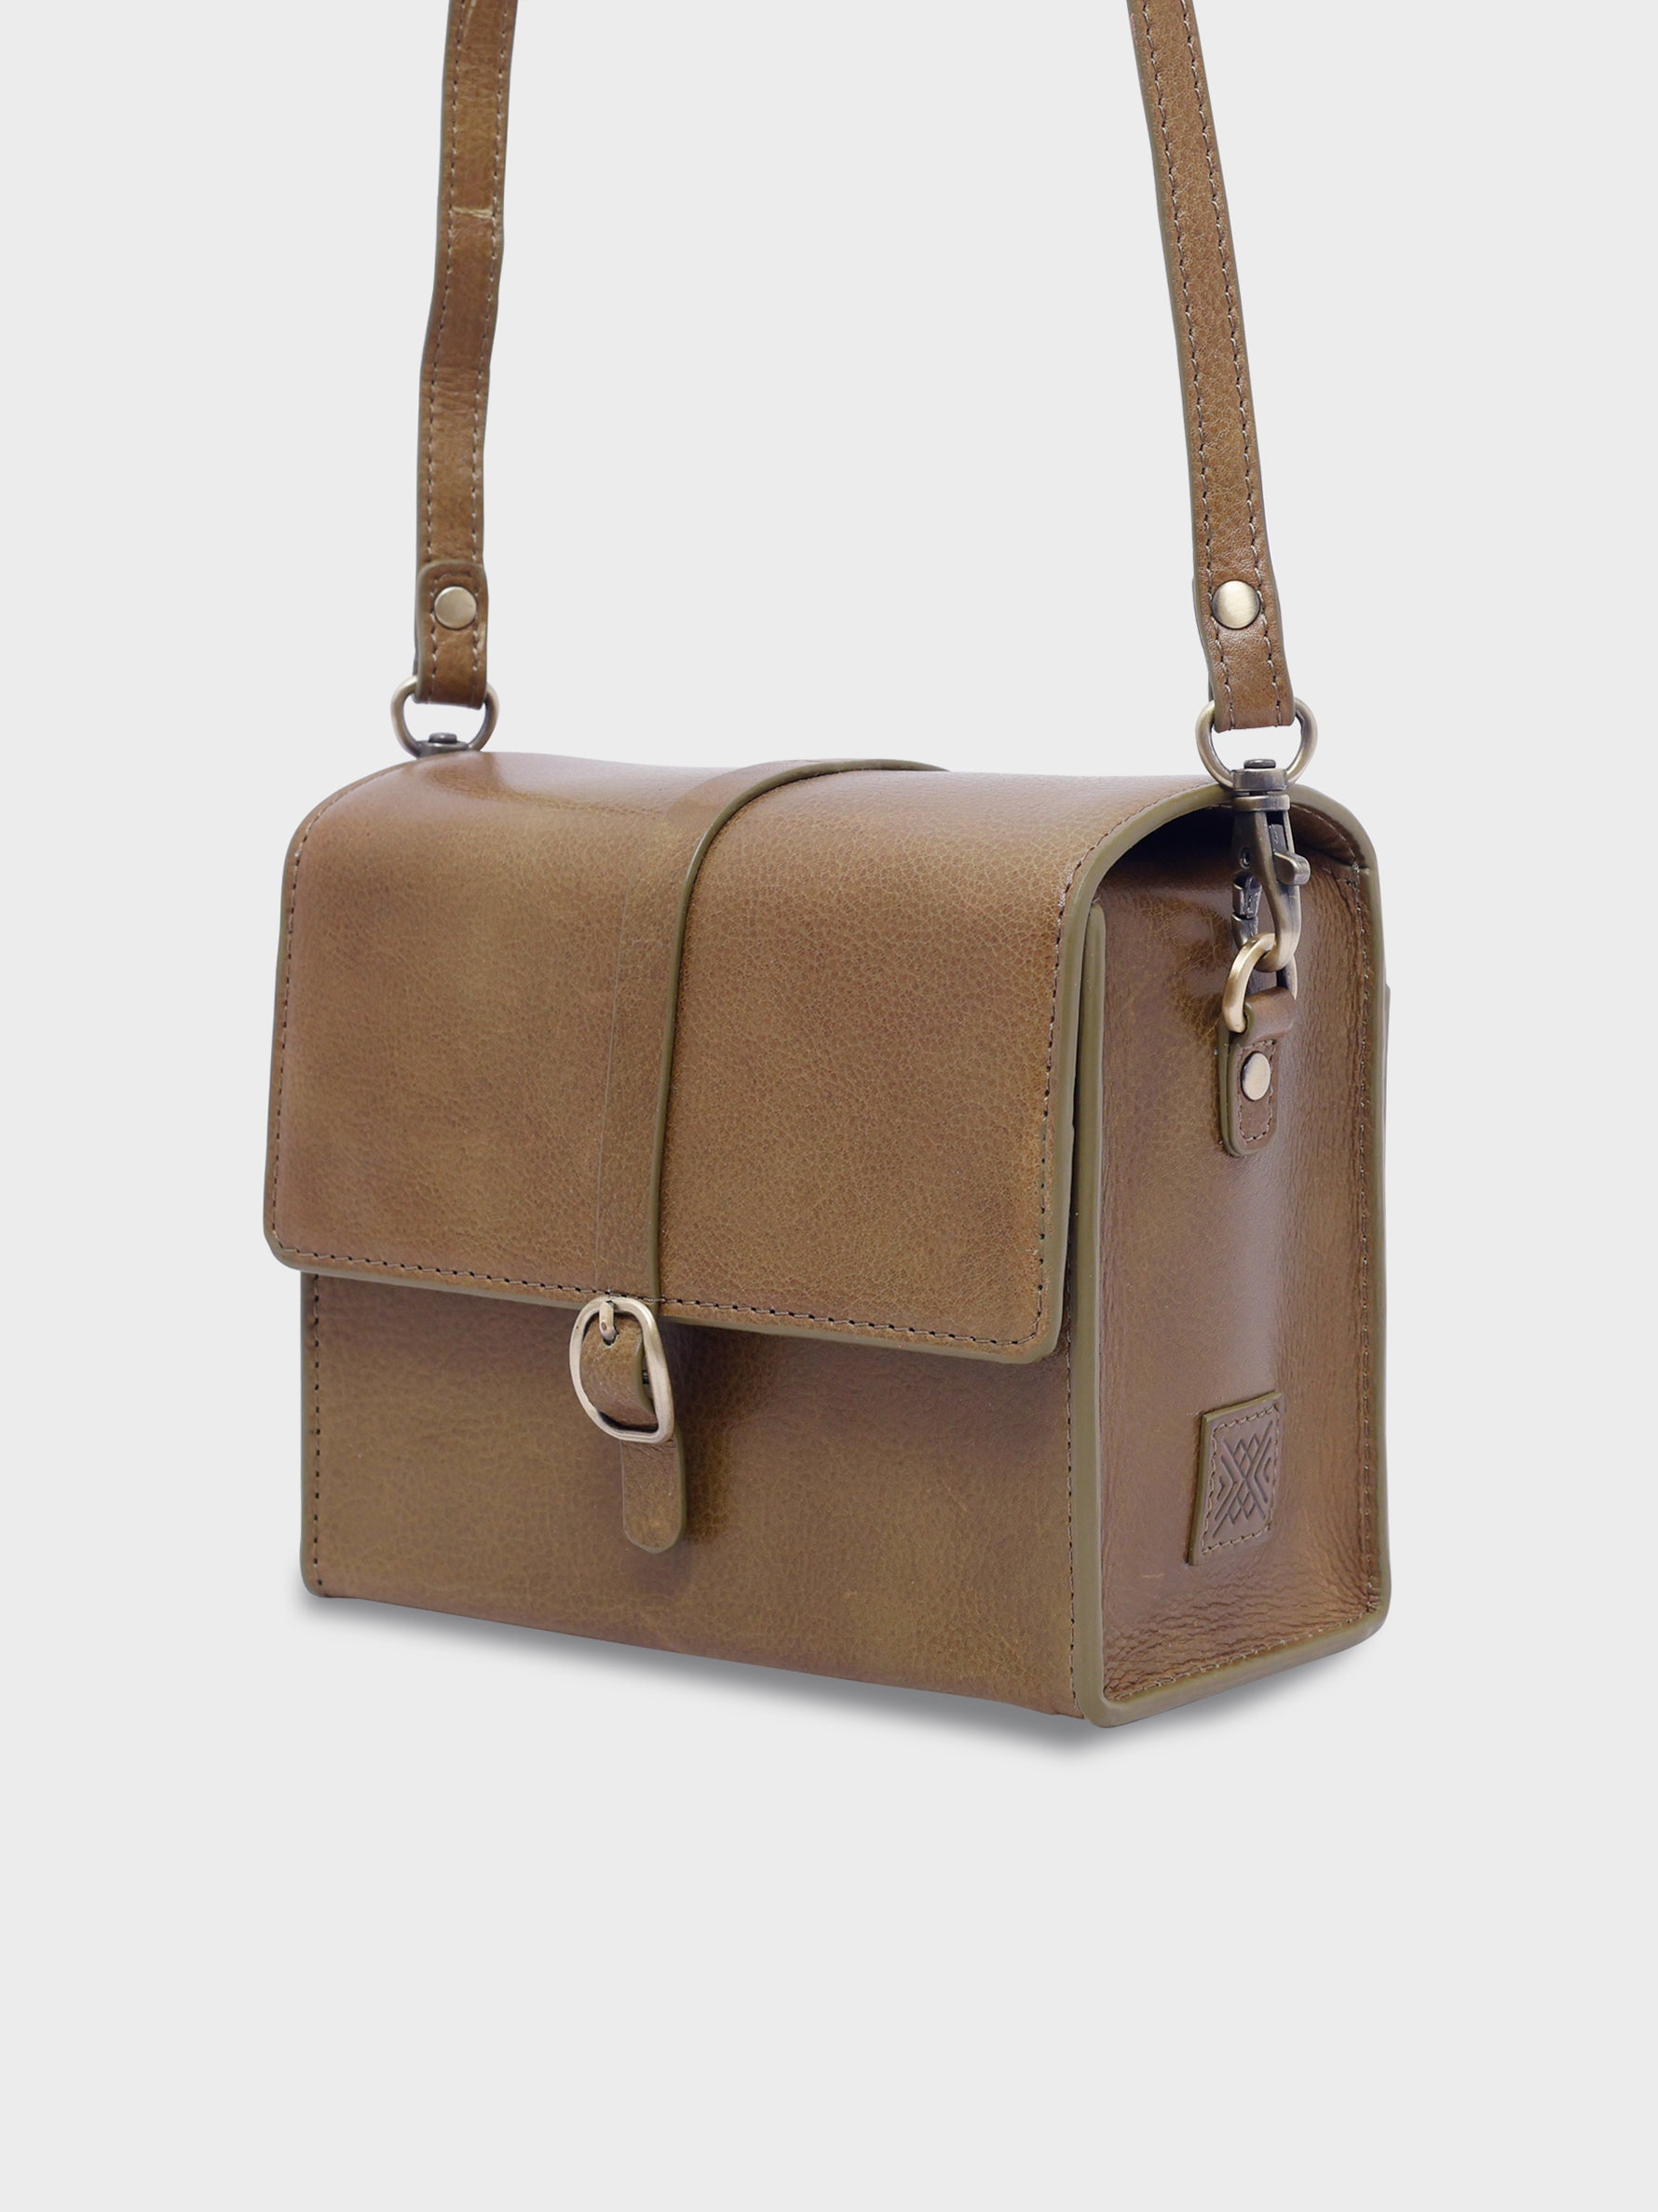 Handcrafted Genuine Vegetable Tanned Leather Piccolo Box Bag Olive Green for Women Tan & Loom